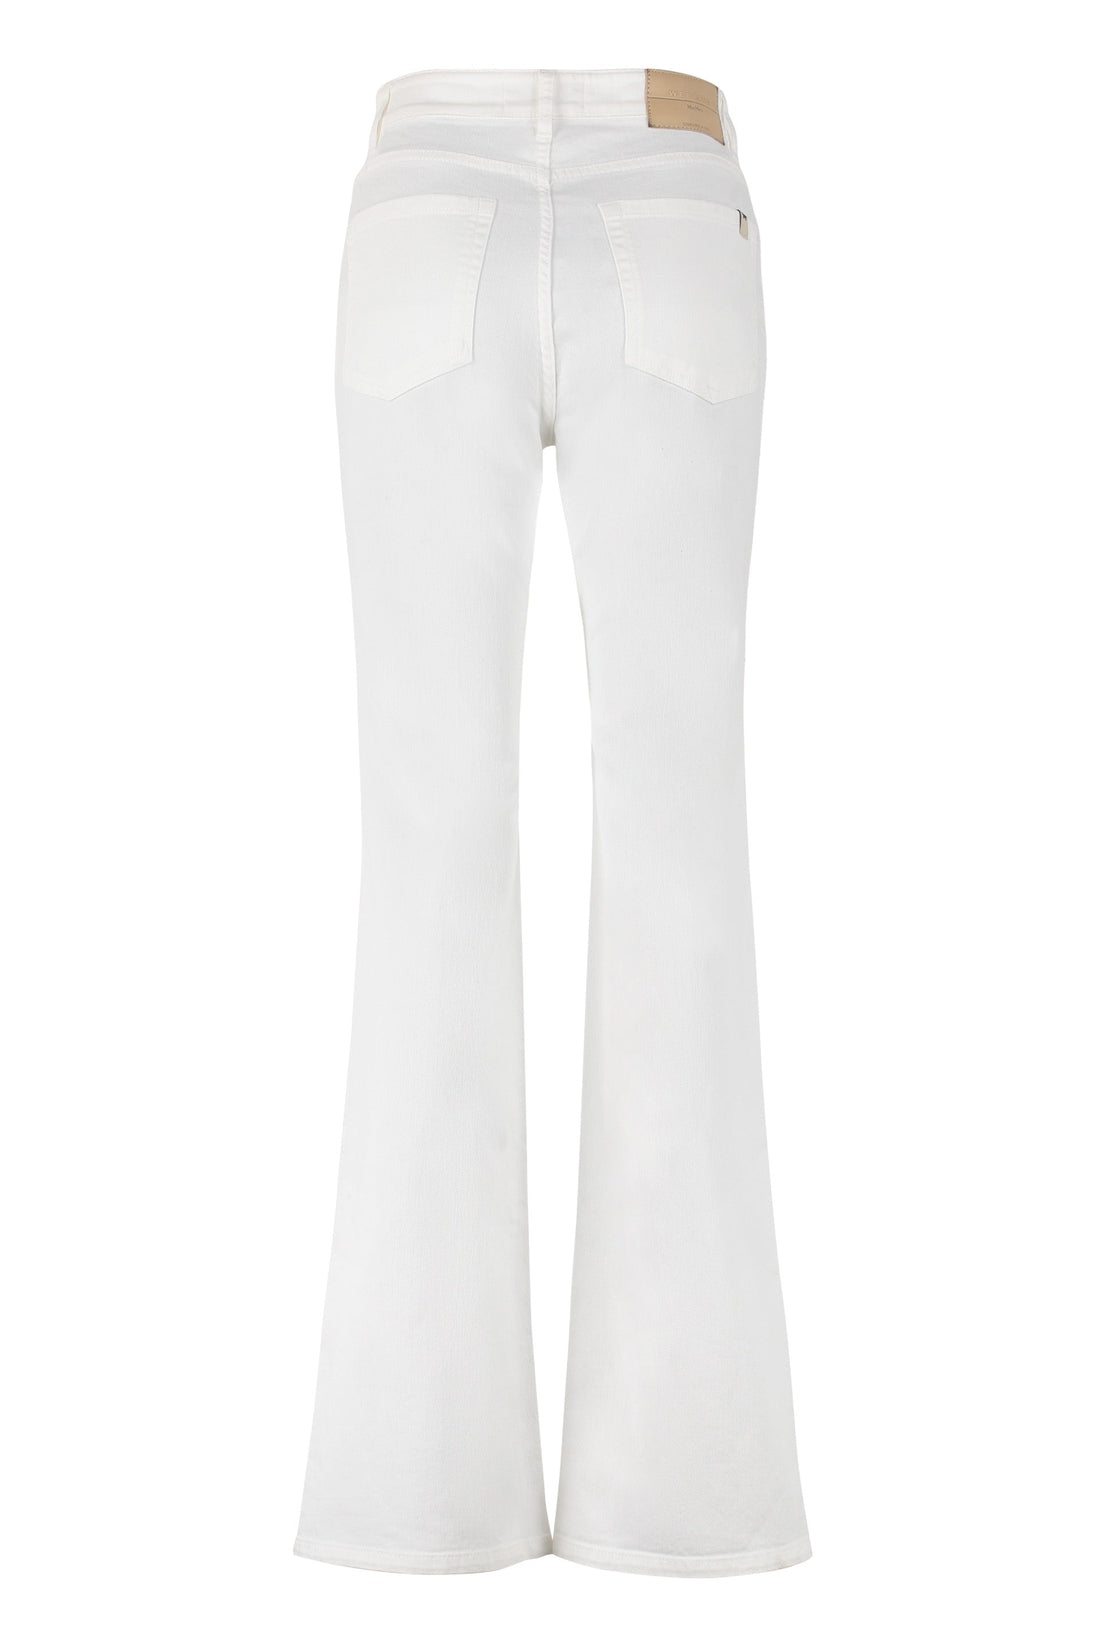 Weekend Max Mara-OUTLET-SALE-Cosimo stretch jeans-ARCHIVIST